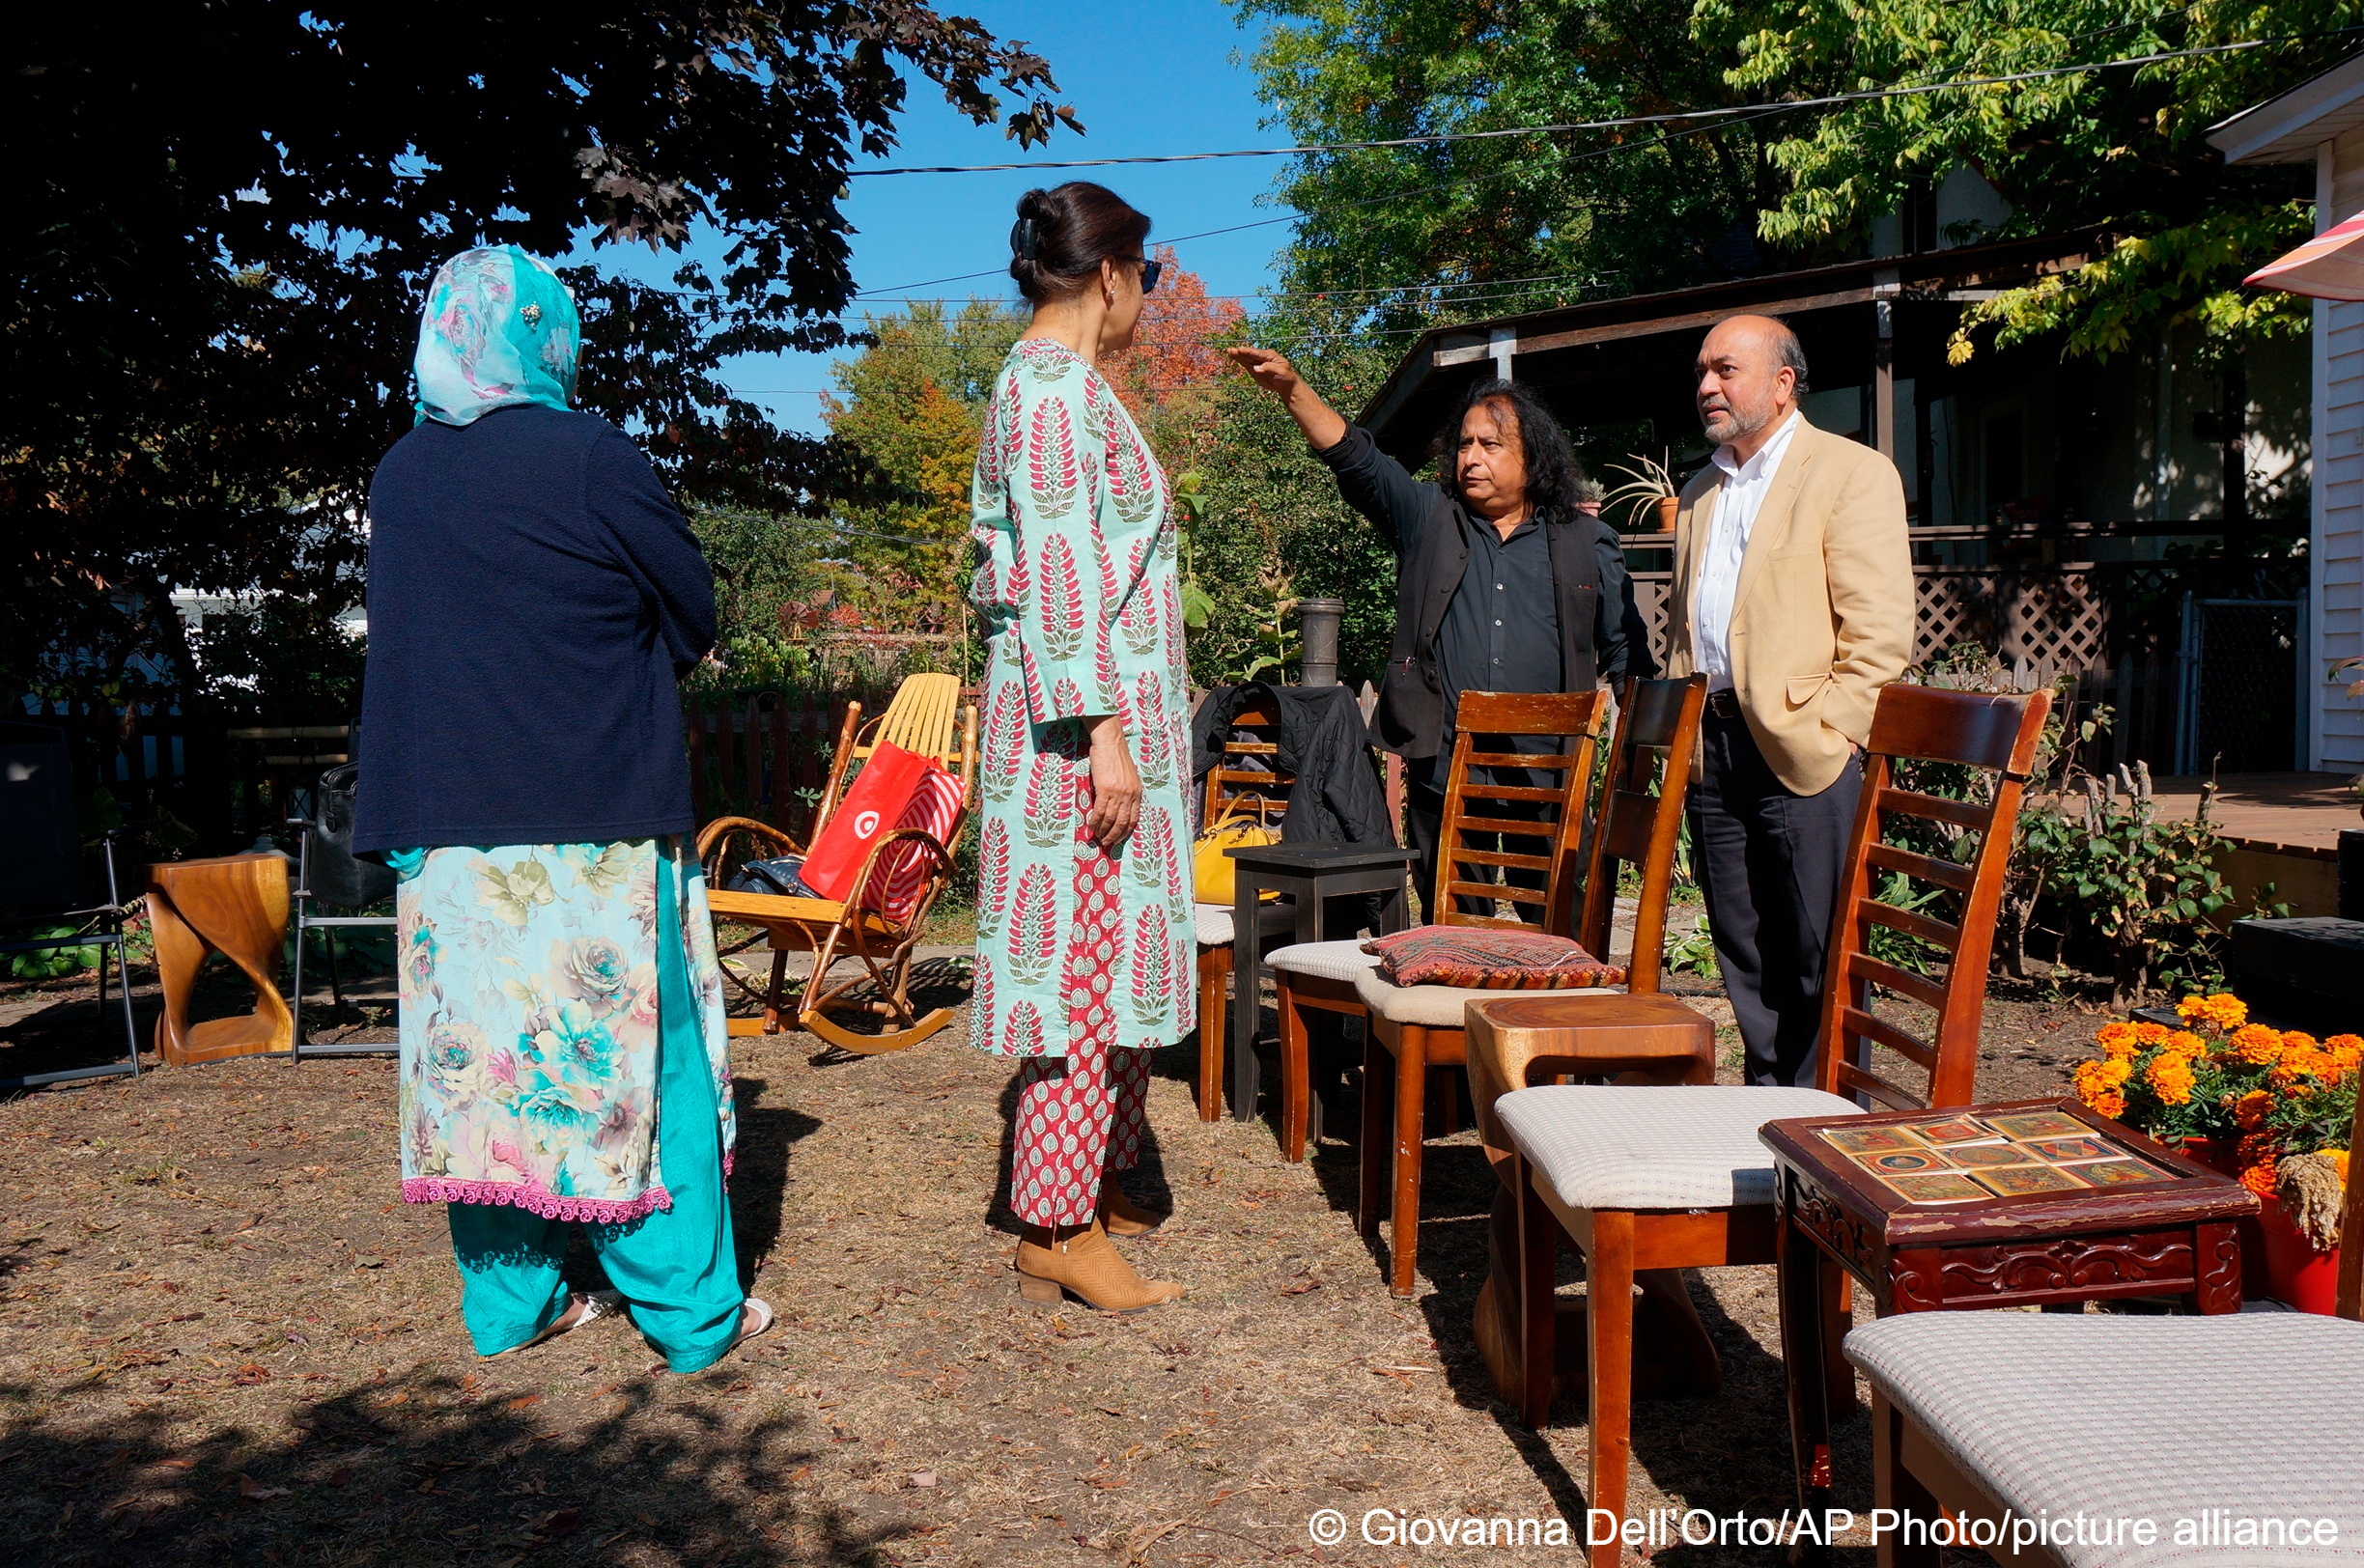 Zafar Siddiqui, right, and other members of the “India Coalition” group gather at the Minneapolis home of Dipankar Mukherjee, second right, and Meena Natarajan on 9 October 2022. The group – representing believers in different faiths as well as atheists – meets monthly to discuss how to prevent religious tensions in India from spreading to the Indian diaspora in the United States (photo: AP Photo/Giovanna Dell’Orto)